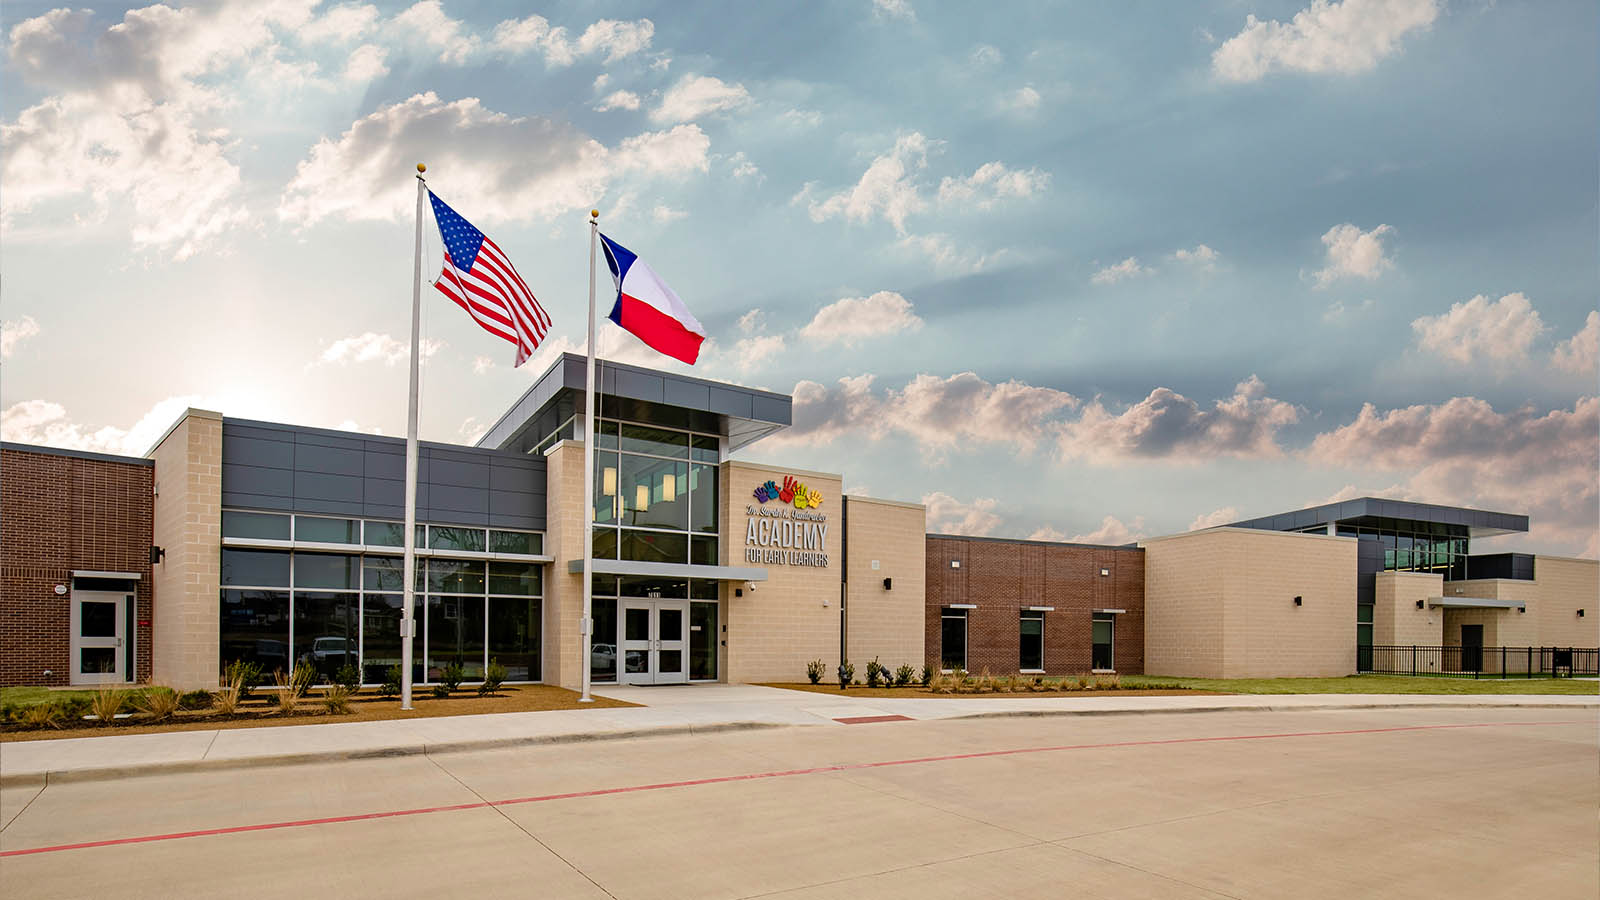 The Dr. Sarah K. Jandrucko Early Learners Academy was built in 2019. Should the bond be approved by voters in May, another academy will be built. Photo by Huckabee Inc.